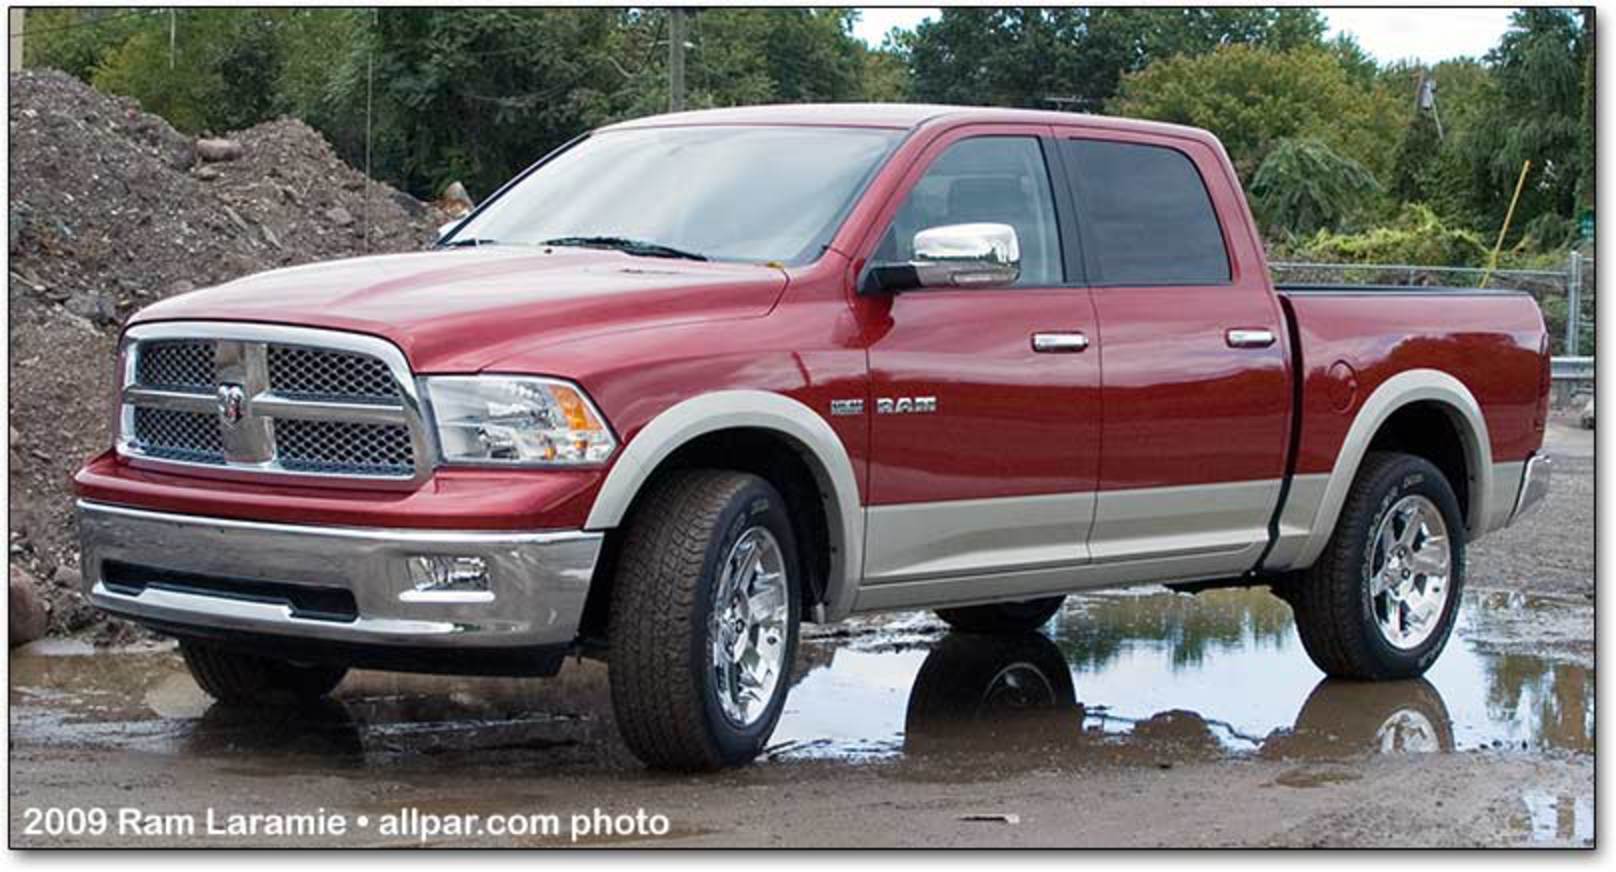 The 2009 Dodge Ram 1500 Crew Cab is one of the finest models produced by